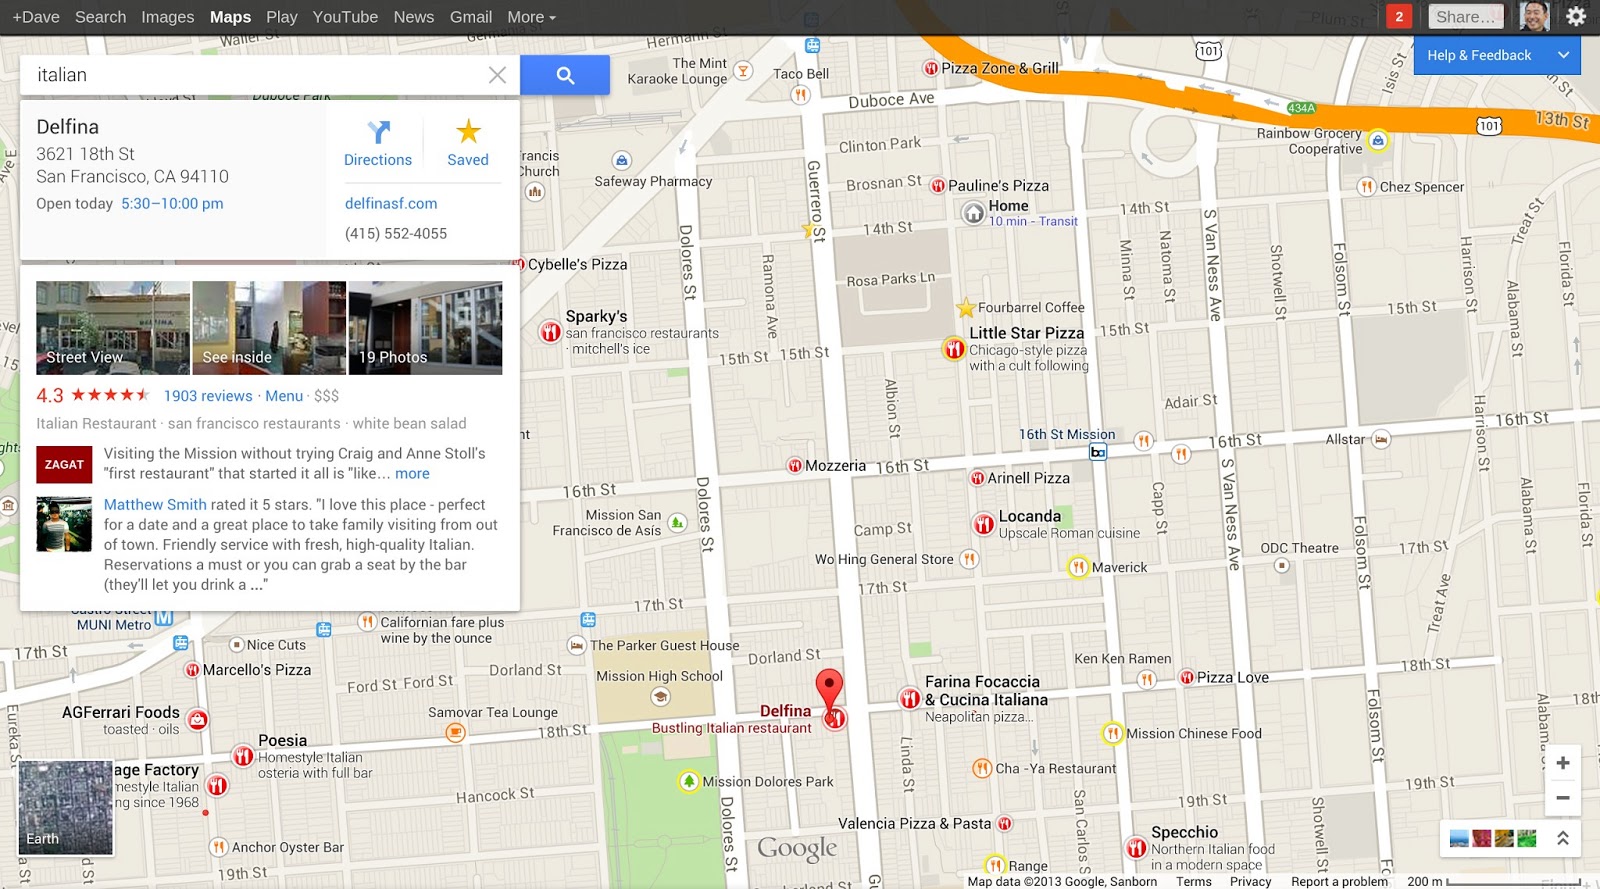 Google Maps redesigned place details (2013)